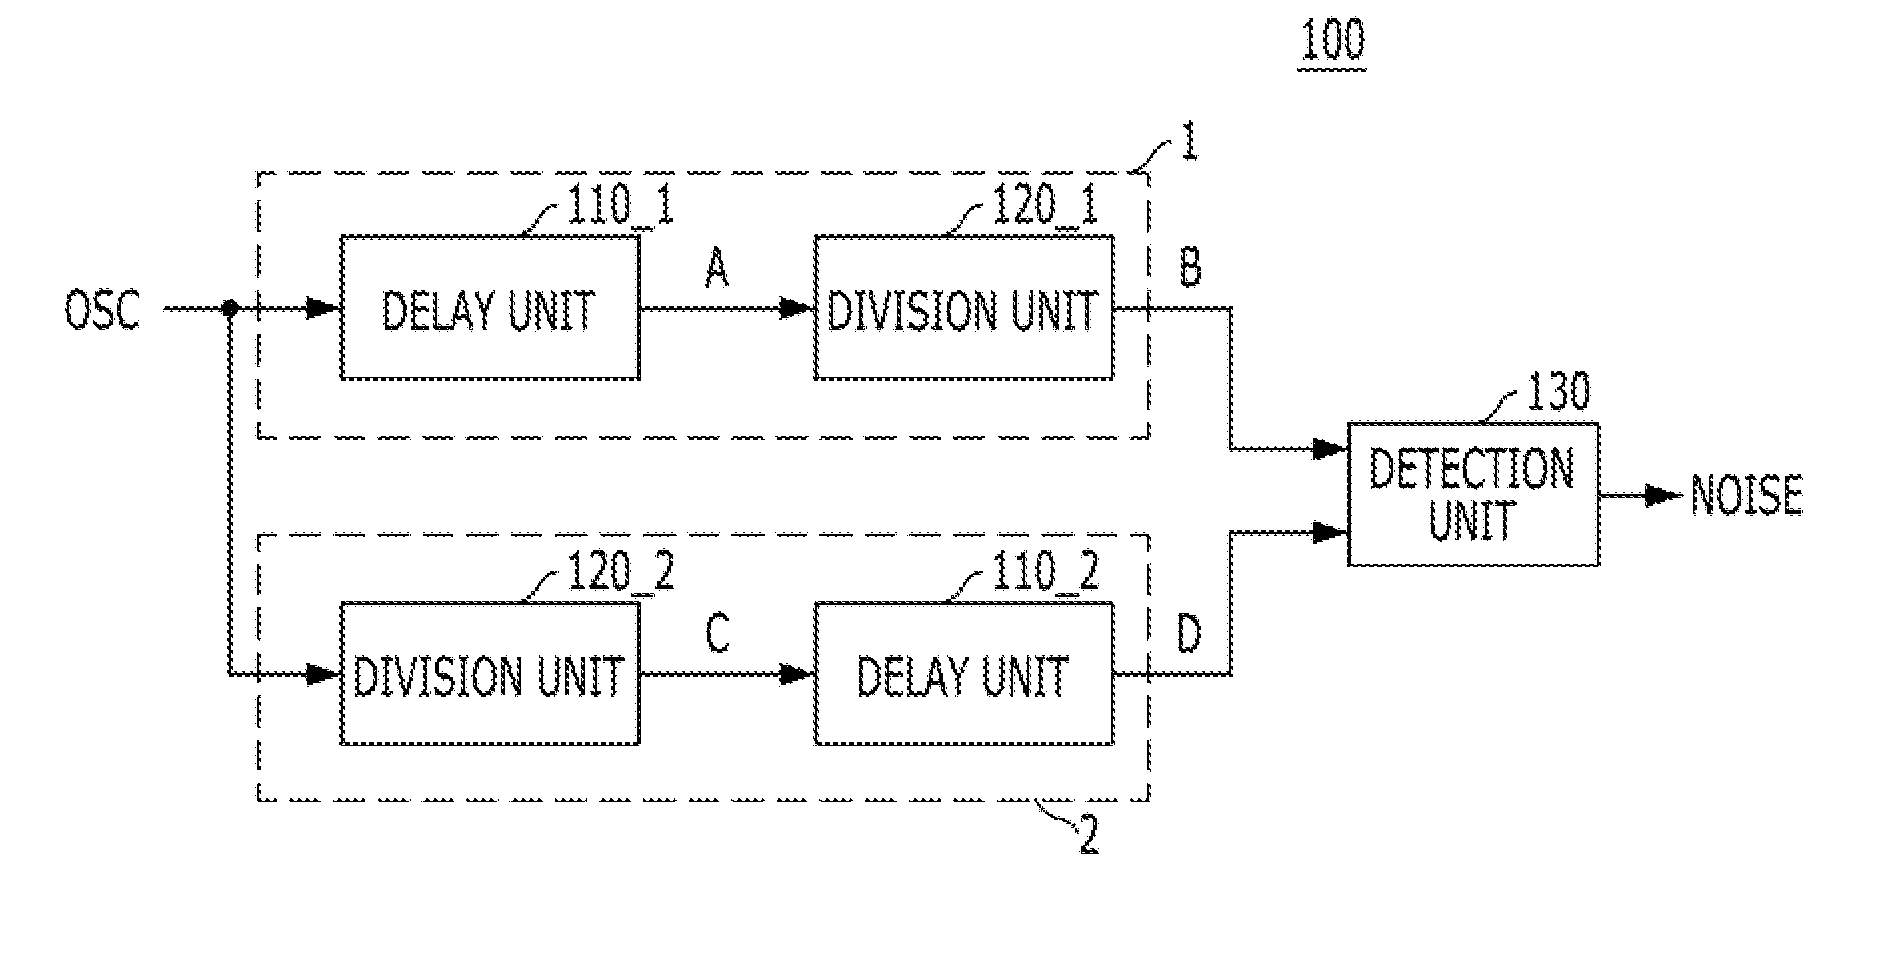 Noise detection circuit, delay locked loop and duty cycle corrector including the same